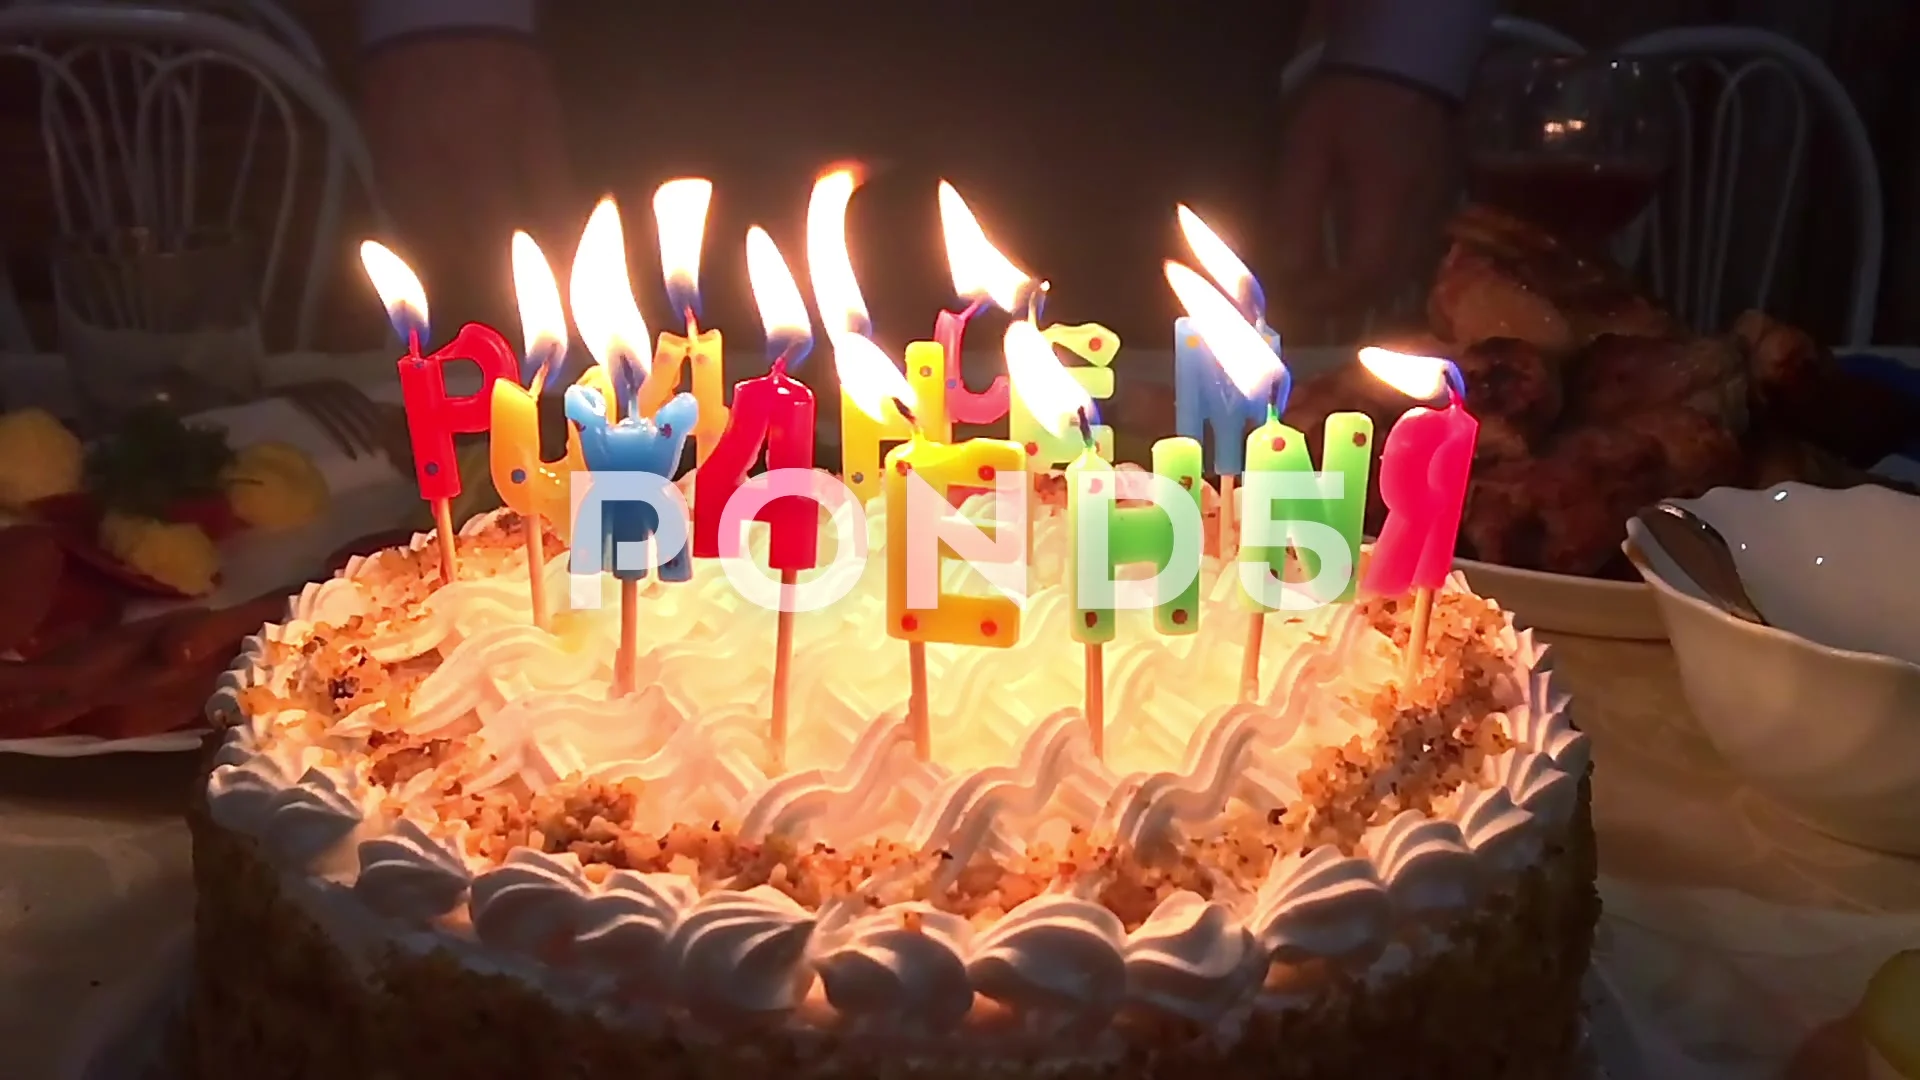 Happy Birthday Wishes Naked Cake Flaming Candles GIF | GIFDB.com